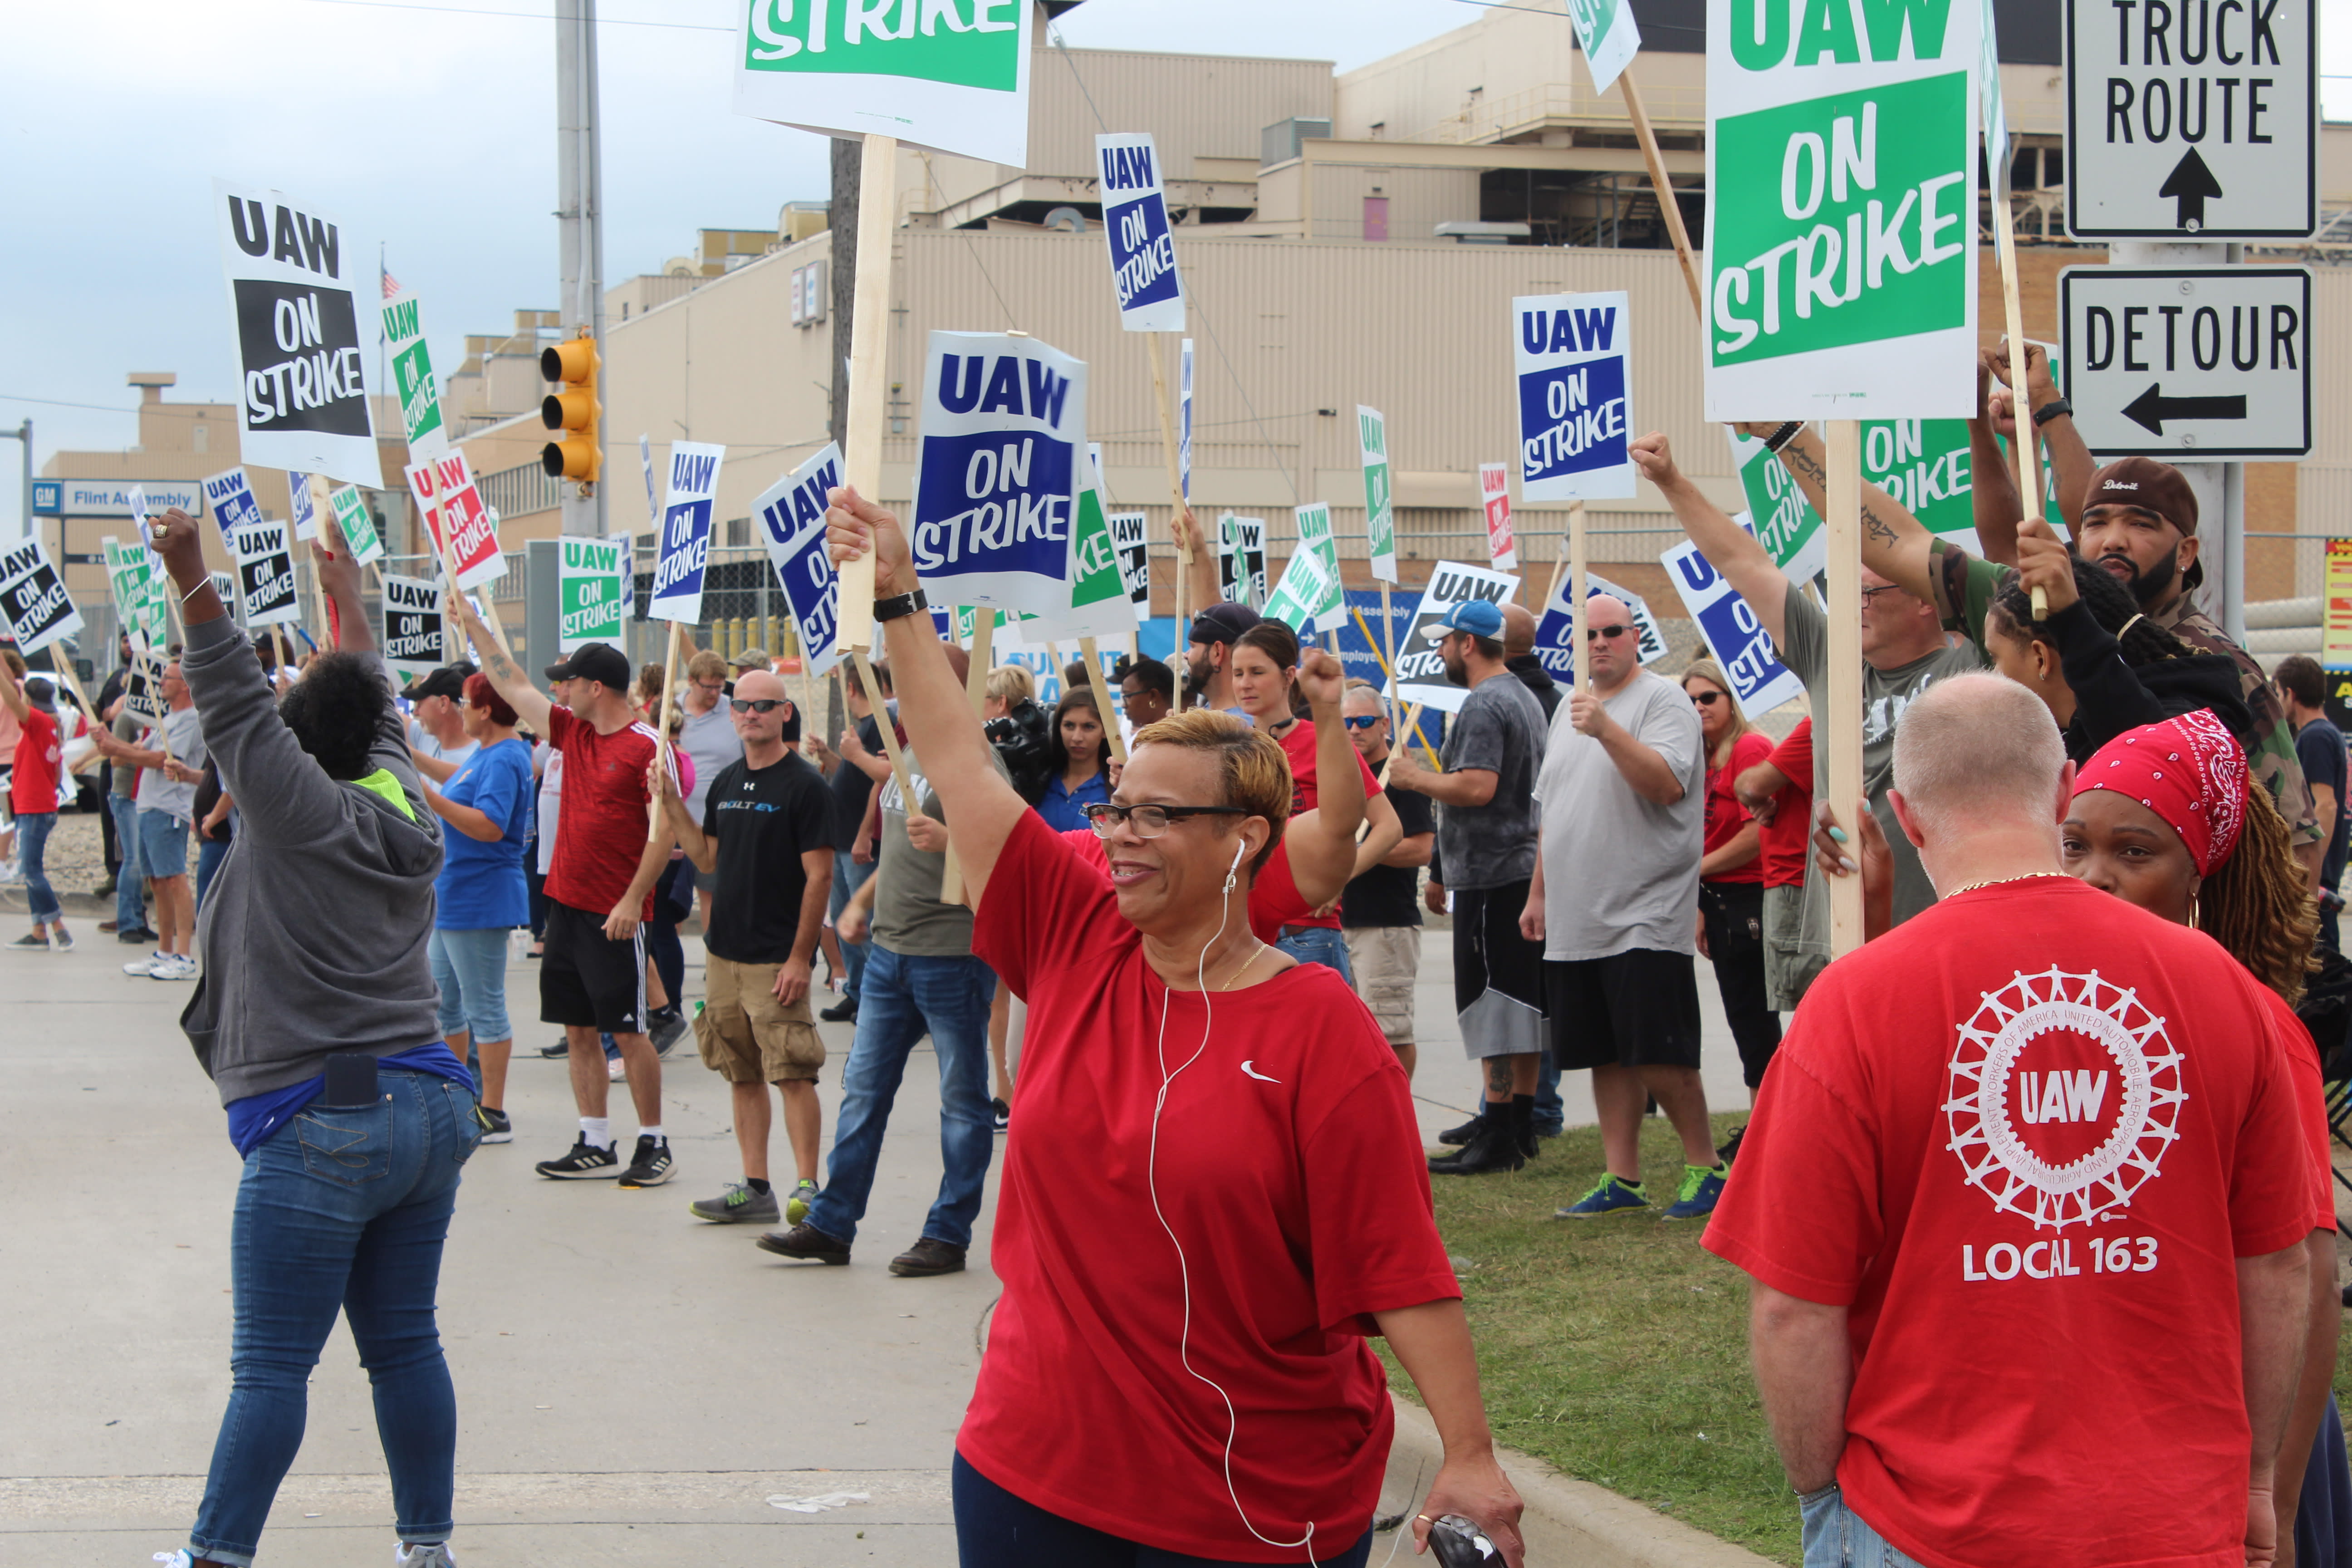 GM to lay off 1,200 Canadian workers due to US slowdown by UAW strike